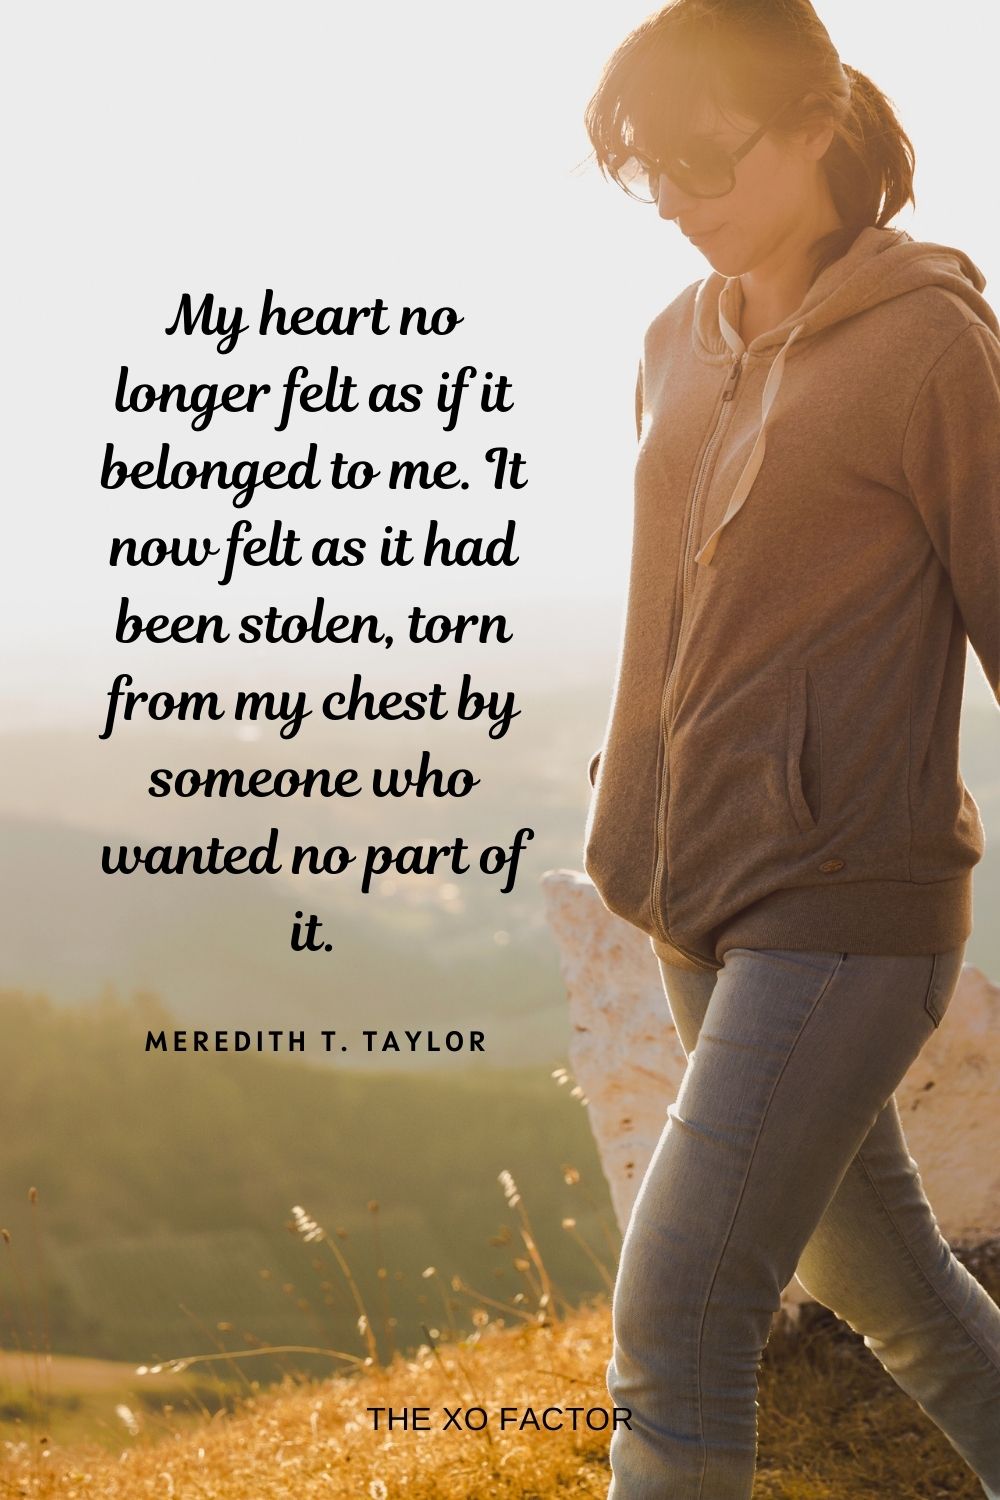 My heart no longer felt as if it belonged to me. It now felt as it had been stolen, torn from my chest by someone who wanted no part of it. Meredith T. Taylor